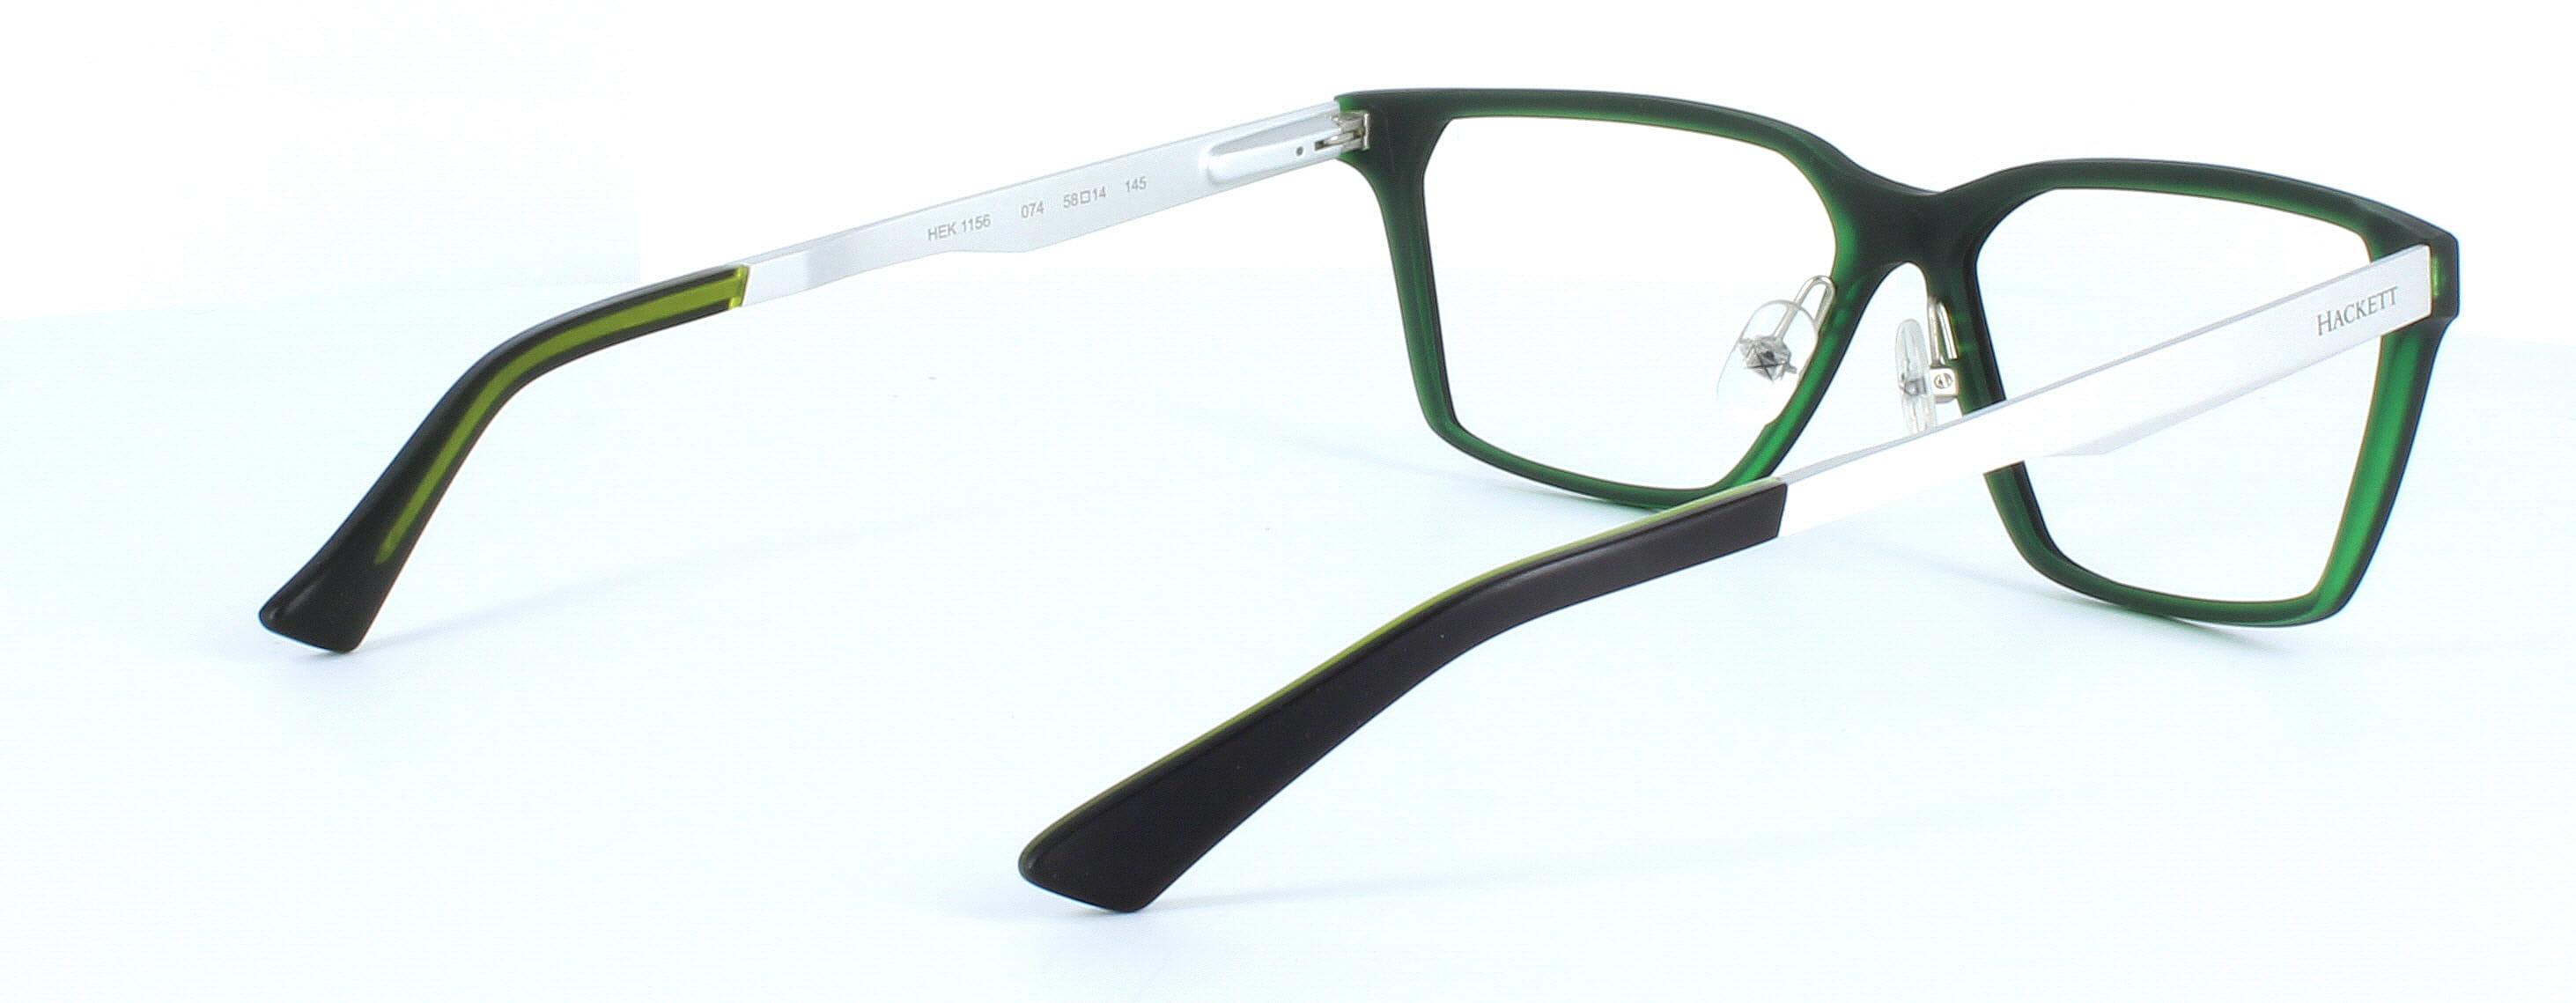 Gent's frame by Hackett - black & green - image view 4